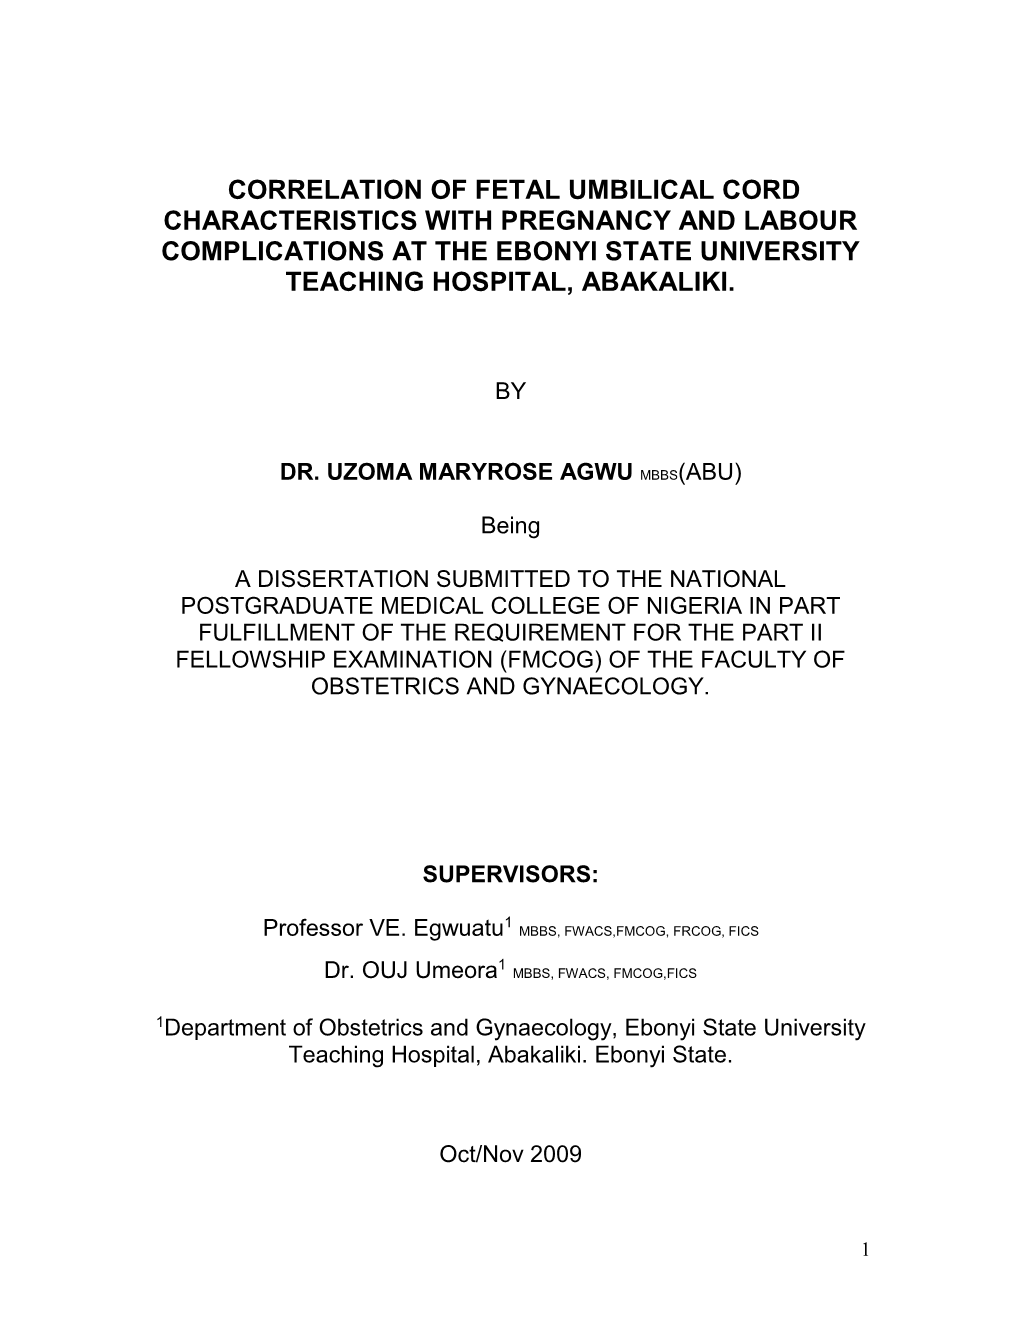 Correlation of Fetal Umbilical Cord Characteristics with Pregnancy and Labour Complications at the Ebonyi State University Teaching Hospital, Abakaliki